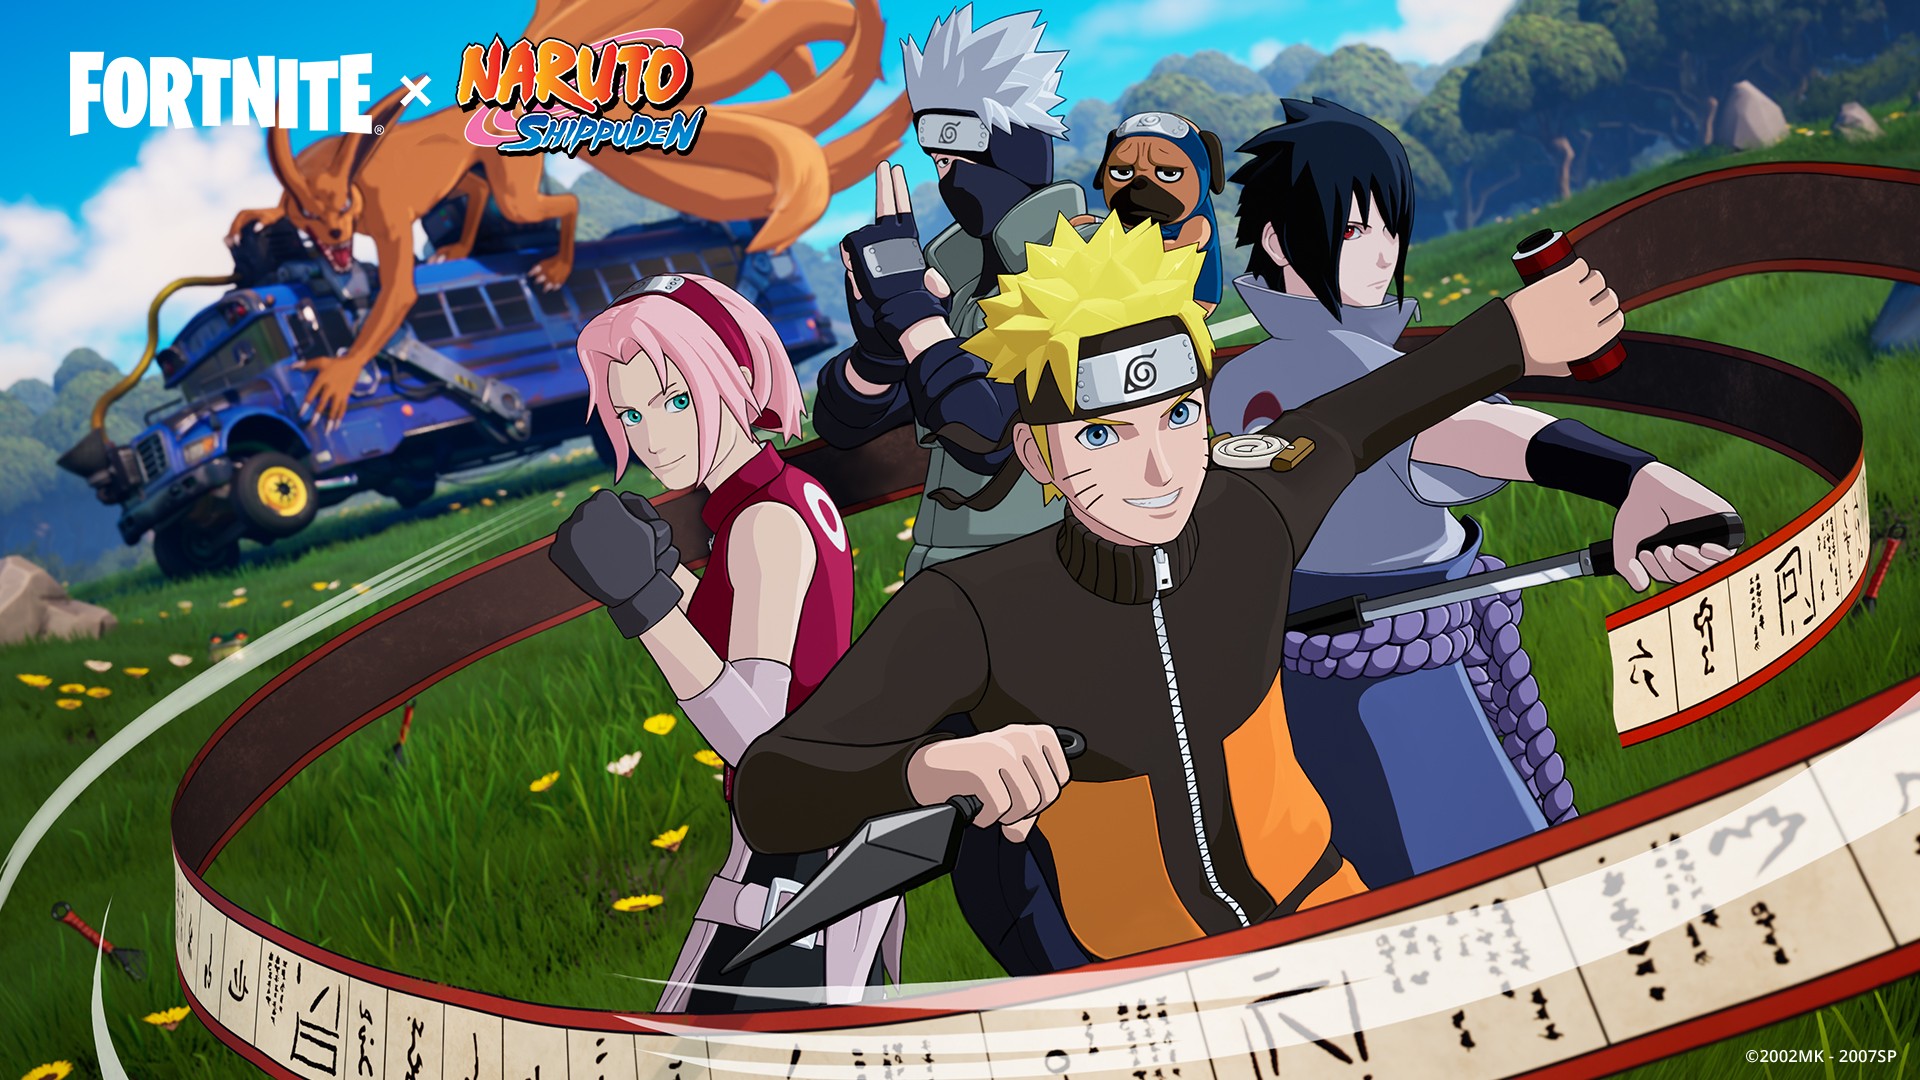 Udlevering Addition Evaluering Naruto and Team 7 Bring the Ways of the Ninja to Fortnite - Xbox Wire